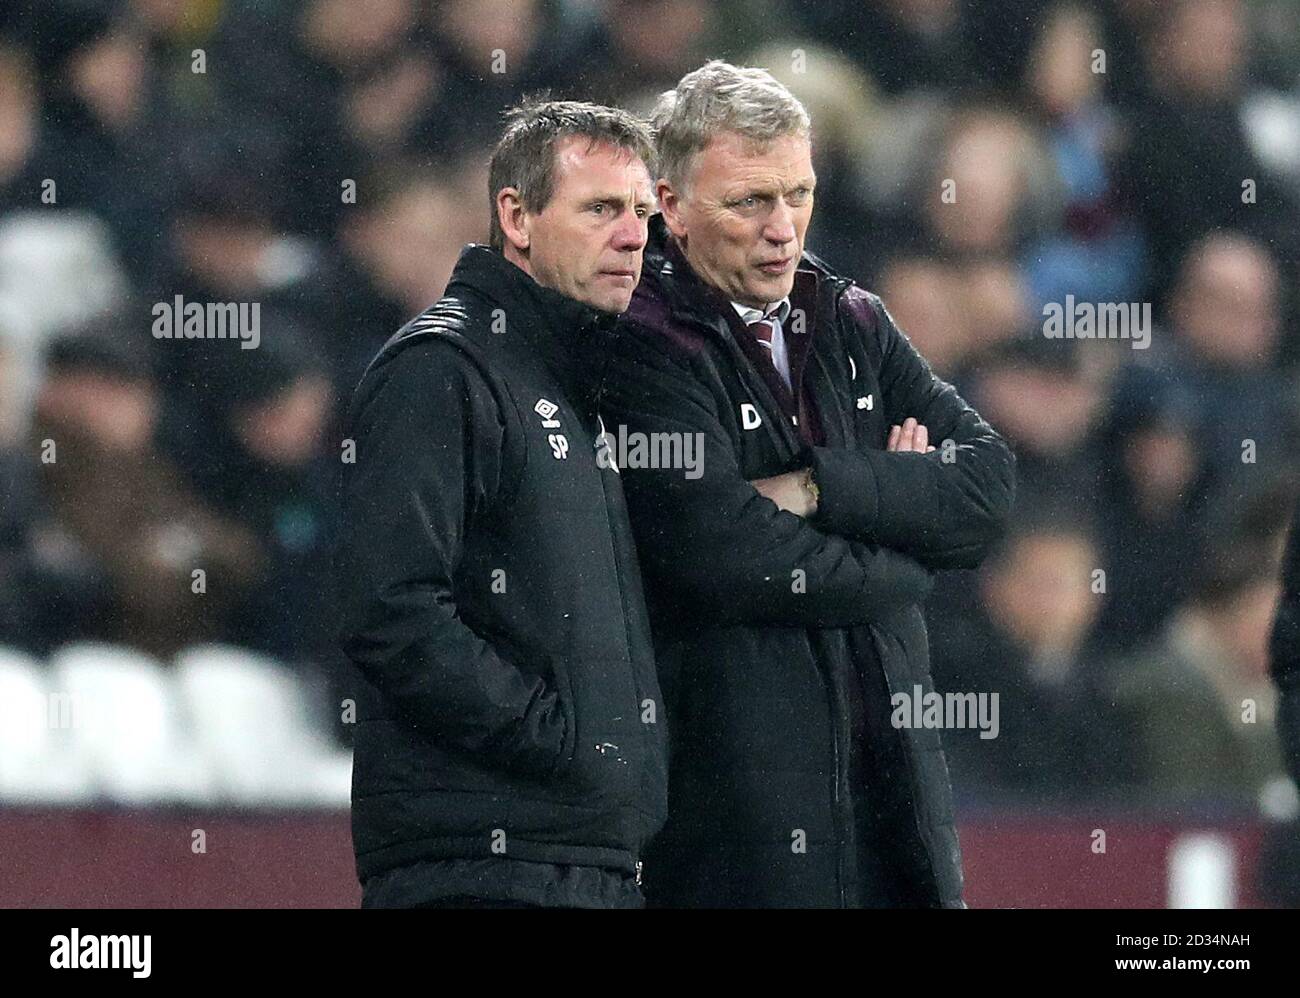 West Ham United manager David Moyes (right) and assistant manager Stuart Pearce (left) during the Premier League match at the London Stadium, London. Stock Photo